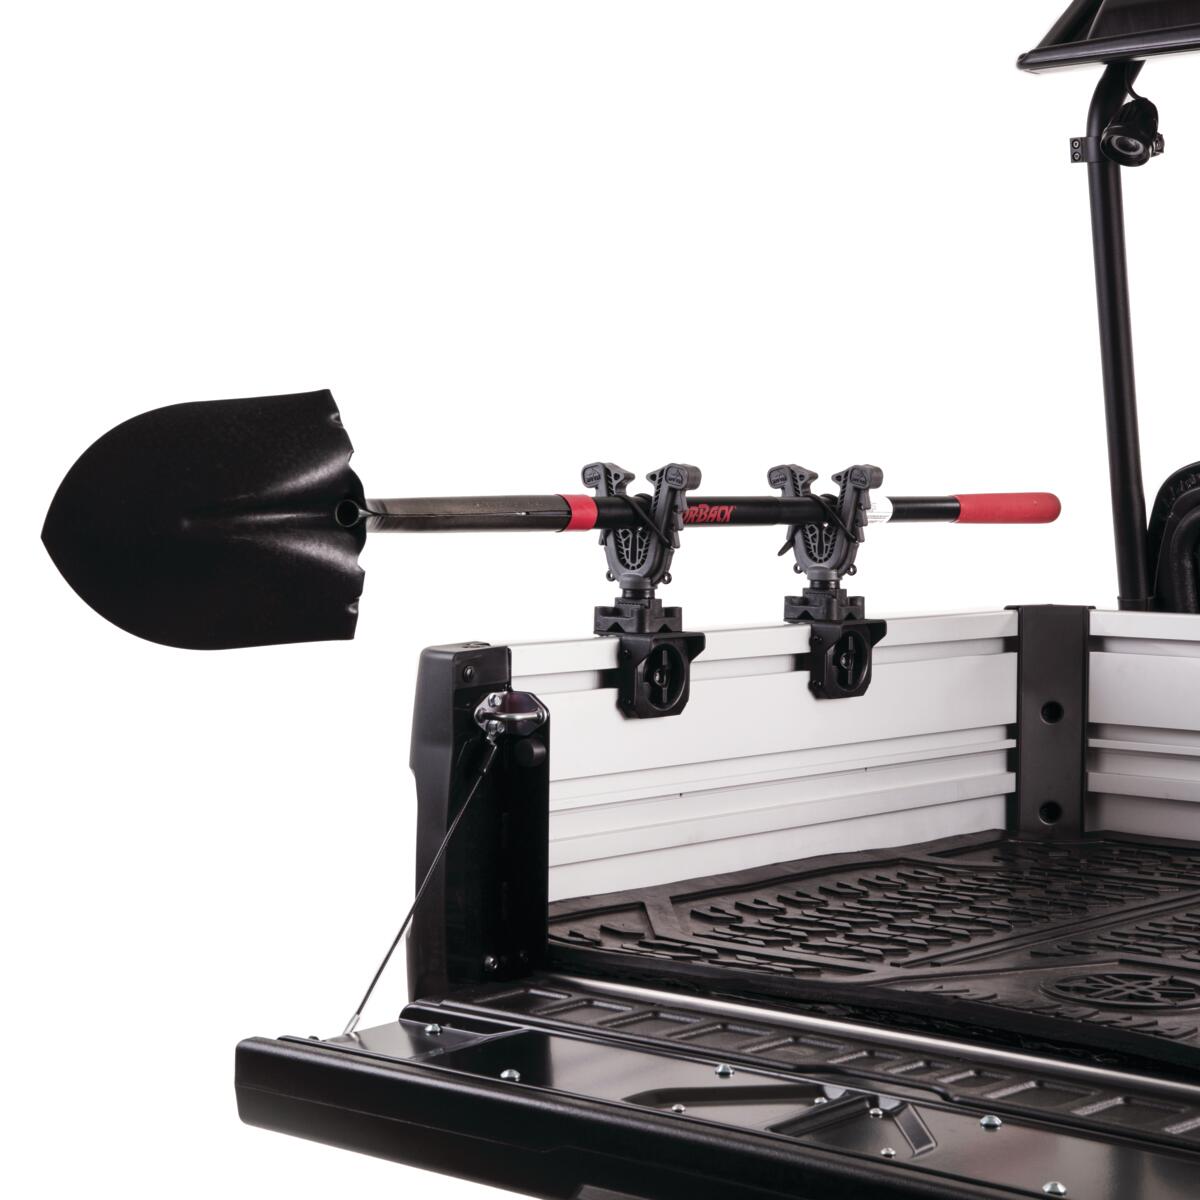 A true custom fit for your tools that attaches to the FusionFit™ Bed Rail Attachment Kit. Experience effortless installation, solid mounting, and easily adjustable knobs for quick, tool-free alterations while on the move. Includes forks (2), mounting blocks (2), rubber snubbers (2), and all necessary mounting hardware for easy installation